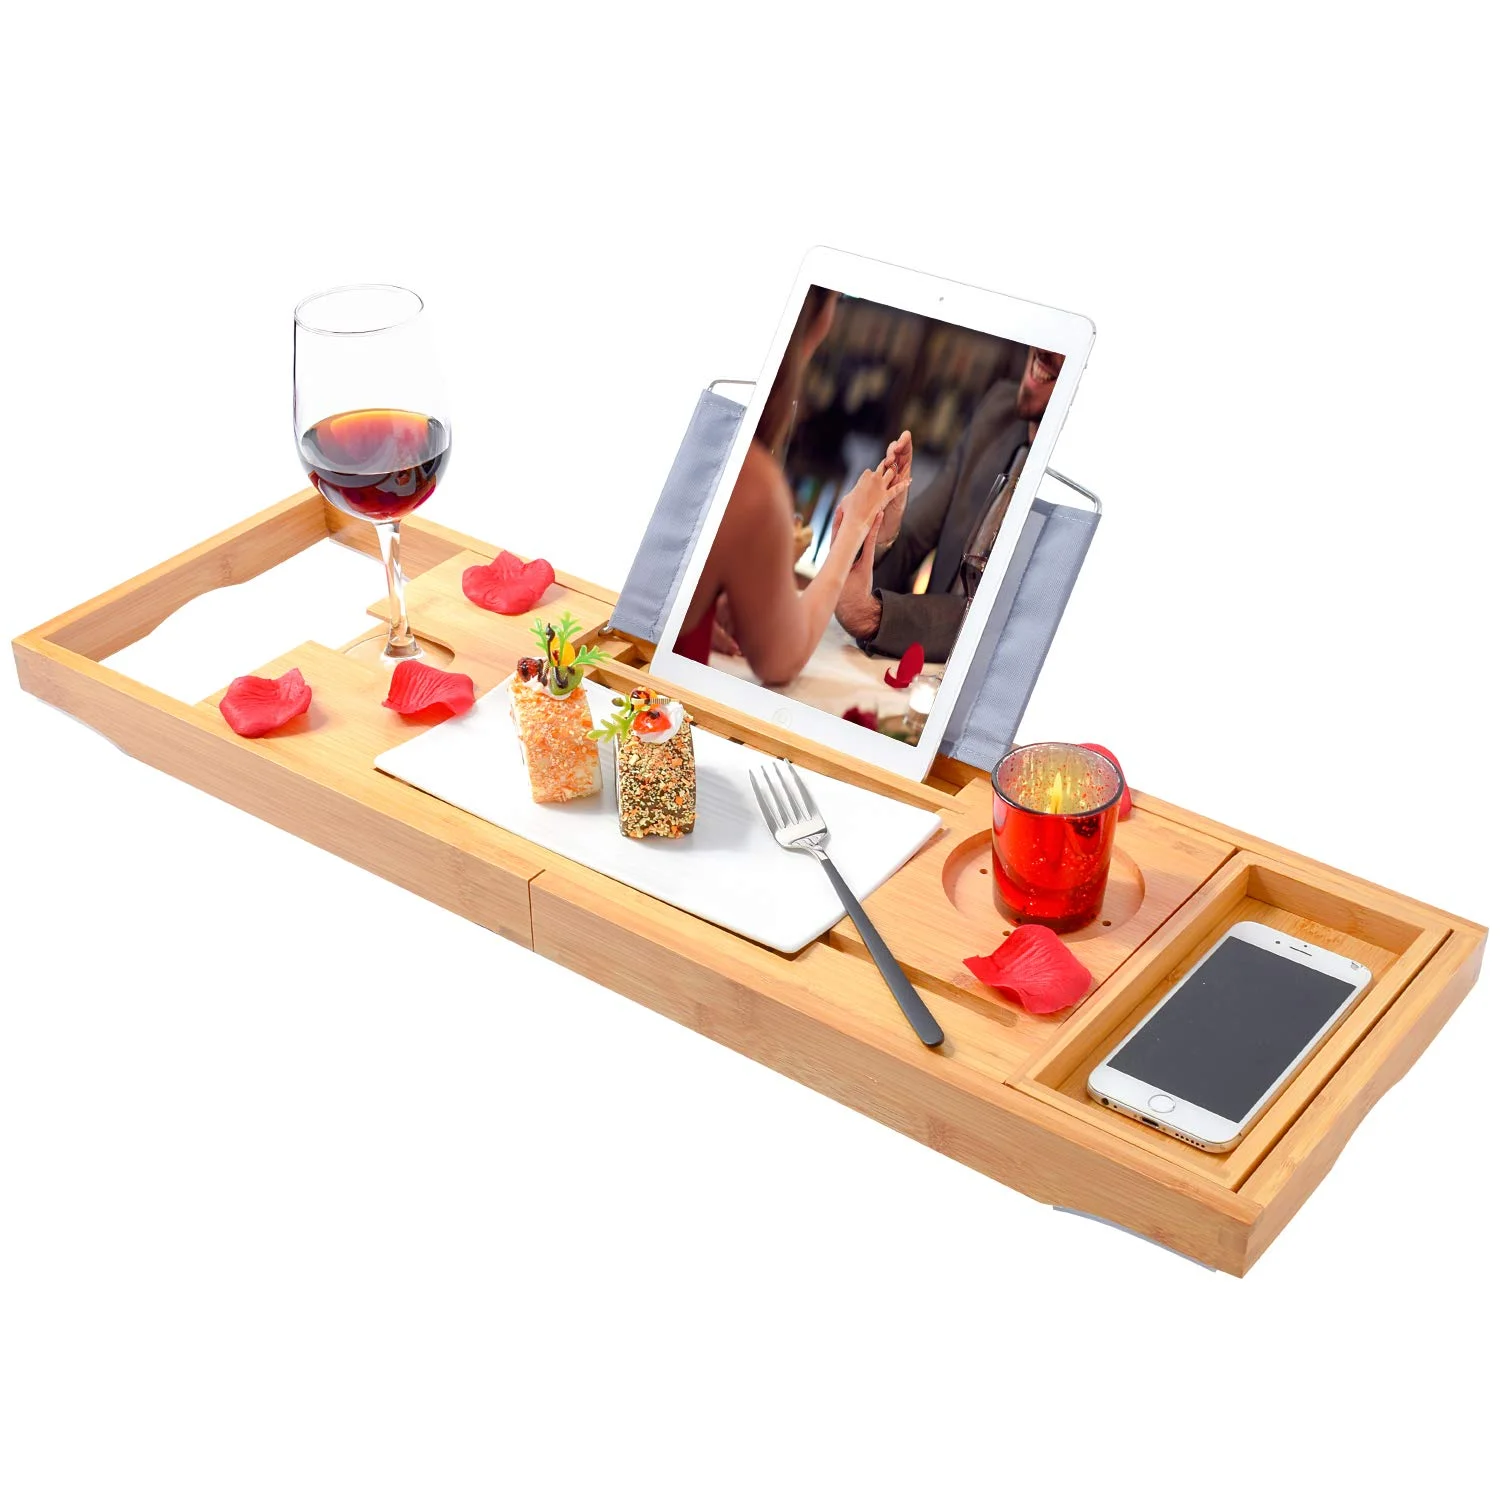 Bamboo Bathtub Trays Bath Table Expandable Luxury Caddy Tray with Extending Sides Cellphone Book Tray and Wineglass Holder